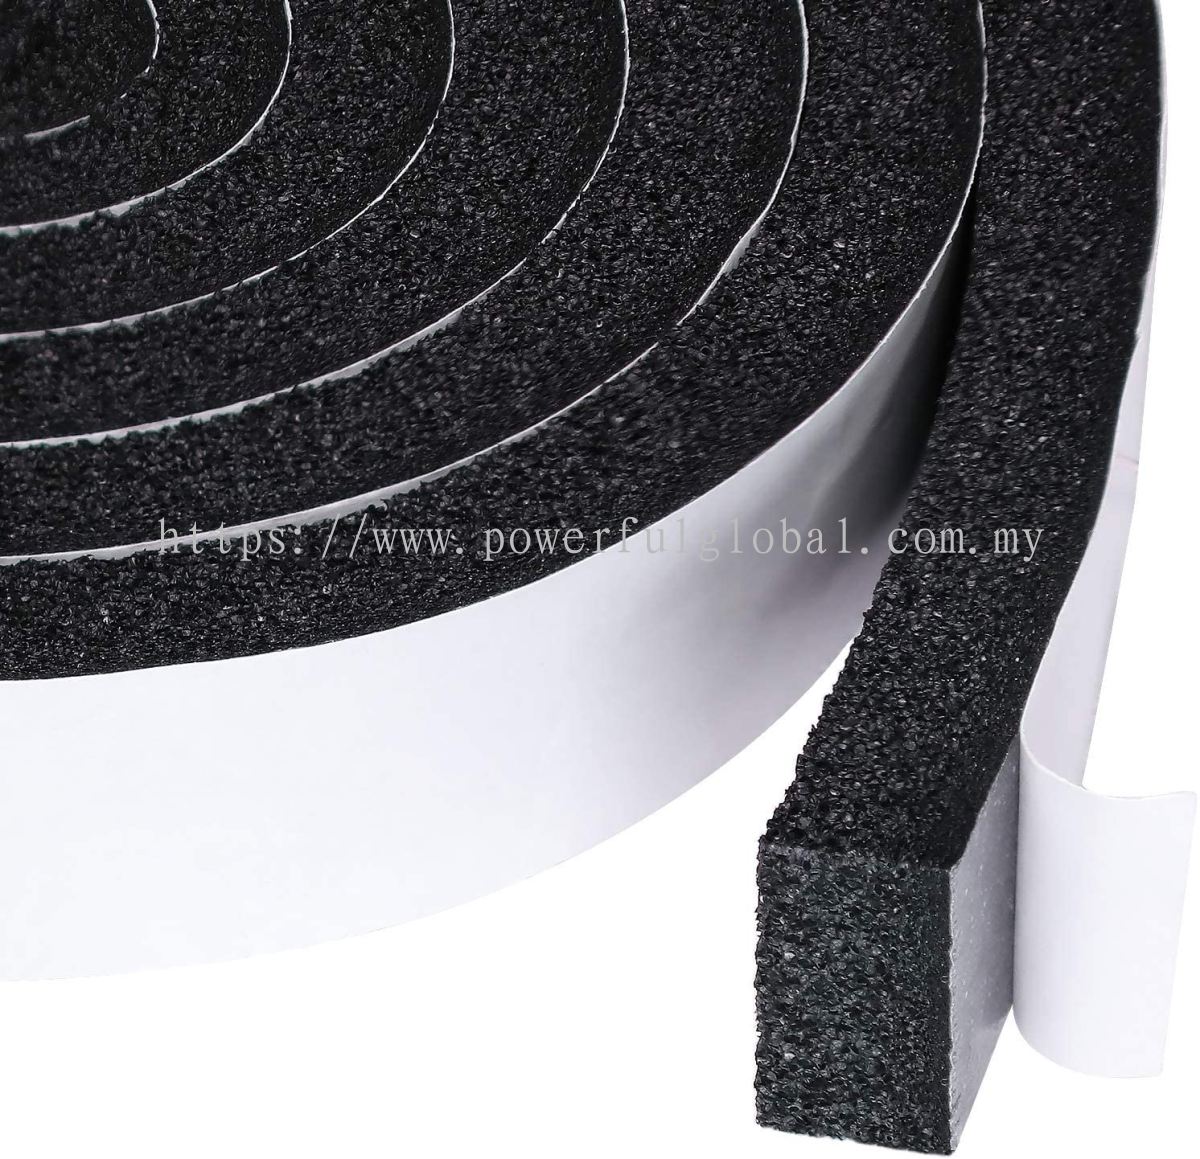 Selangor NBR Rubber Foam With Adhesive Tape EPDM /NBR Nitrile